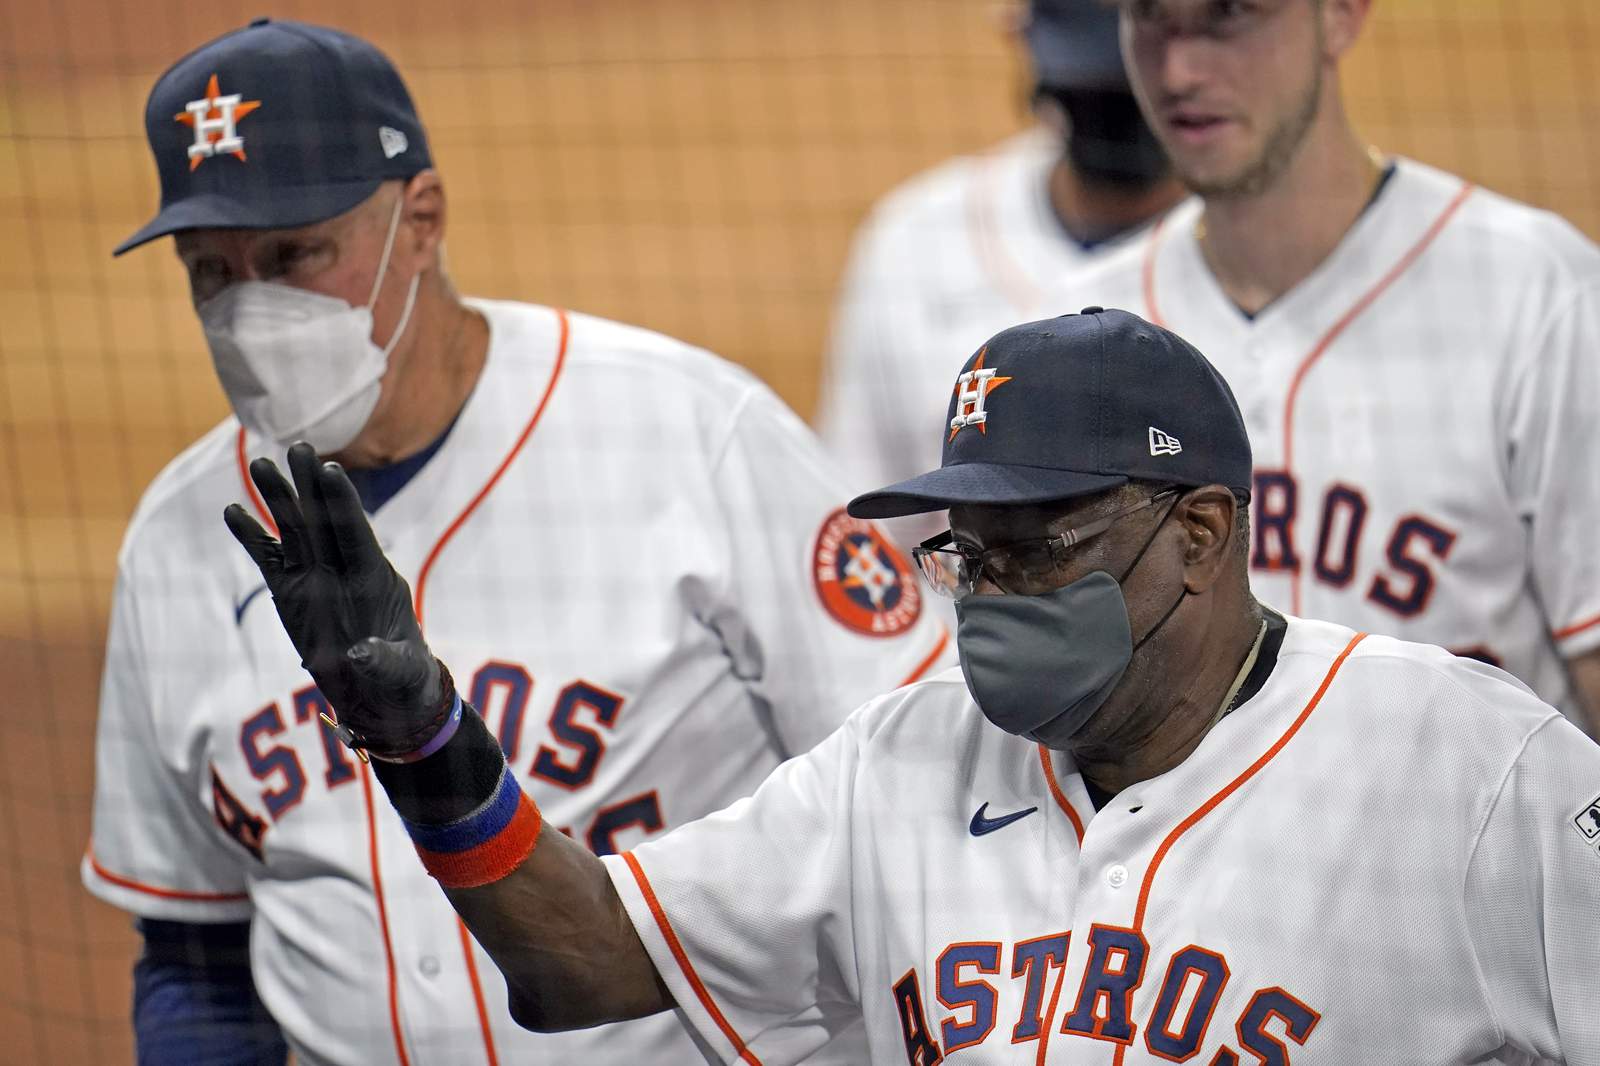 Houston Astros coaches contracts extended